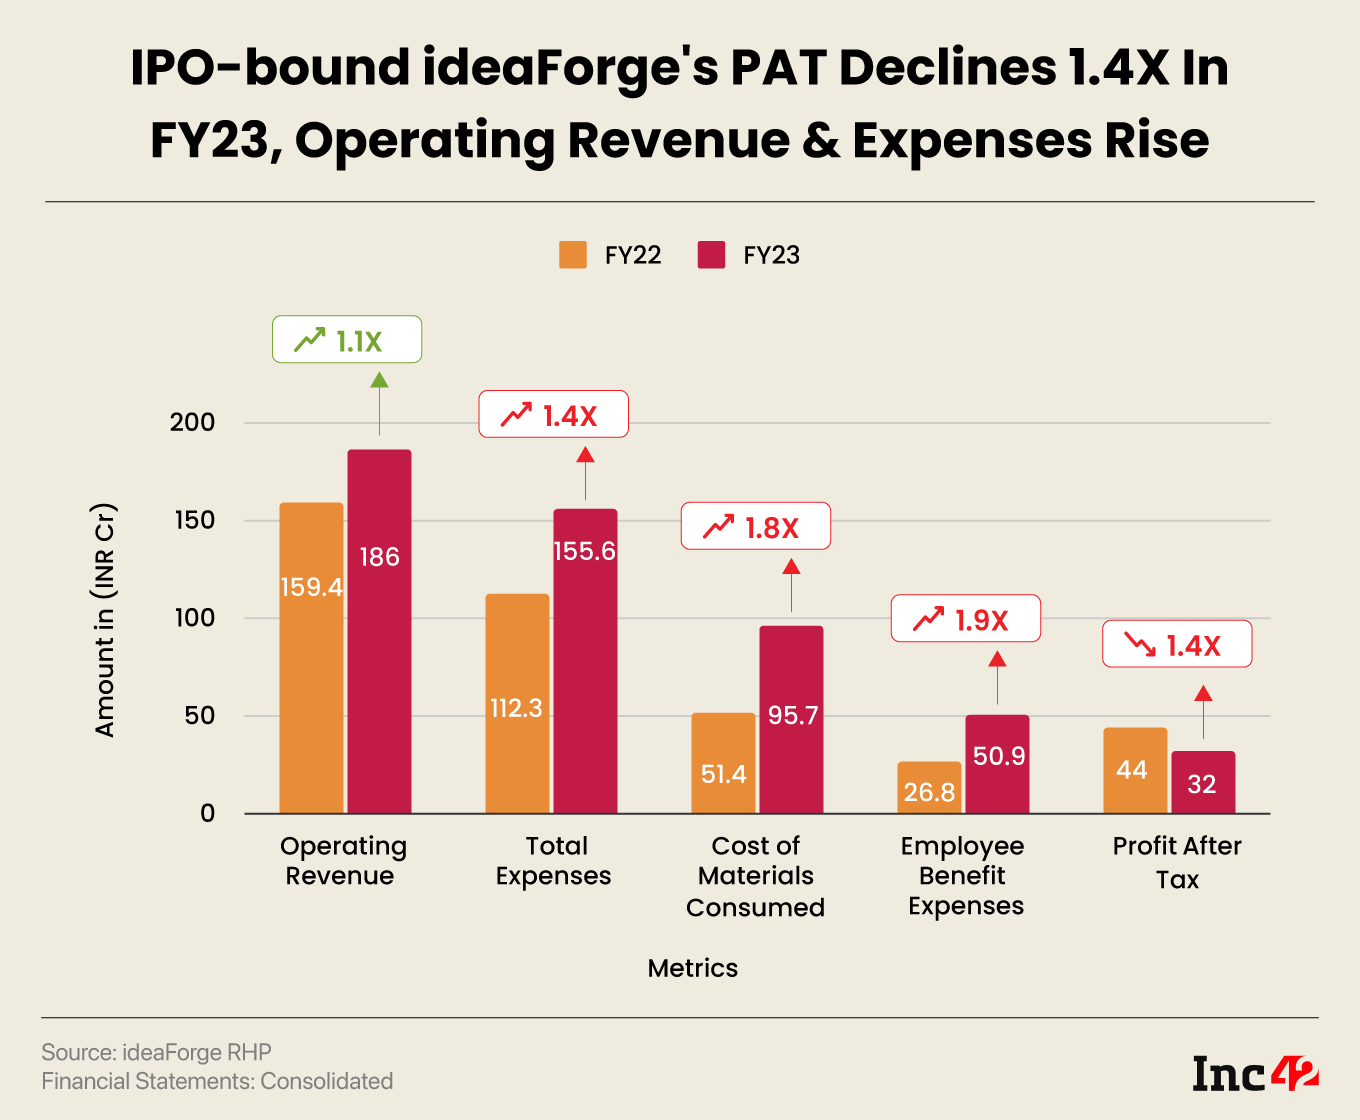 IPO-bound ideaForge's PAT Declines 1.4X In FY23, Operating Revenue & Expenses Rise